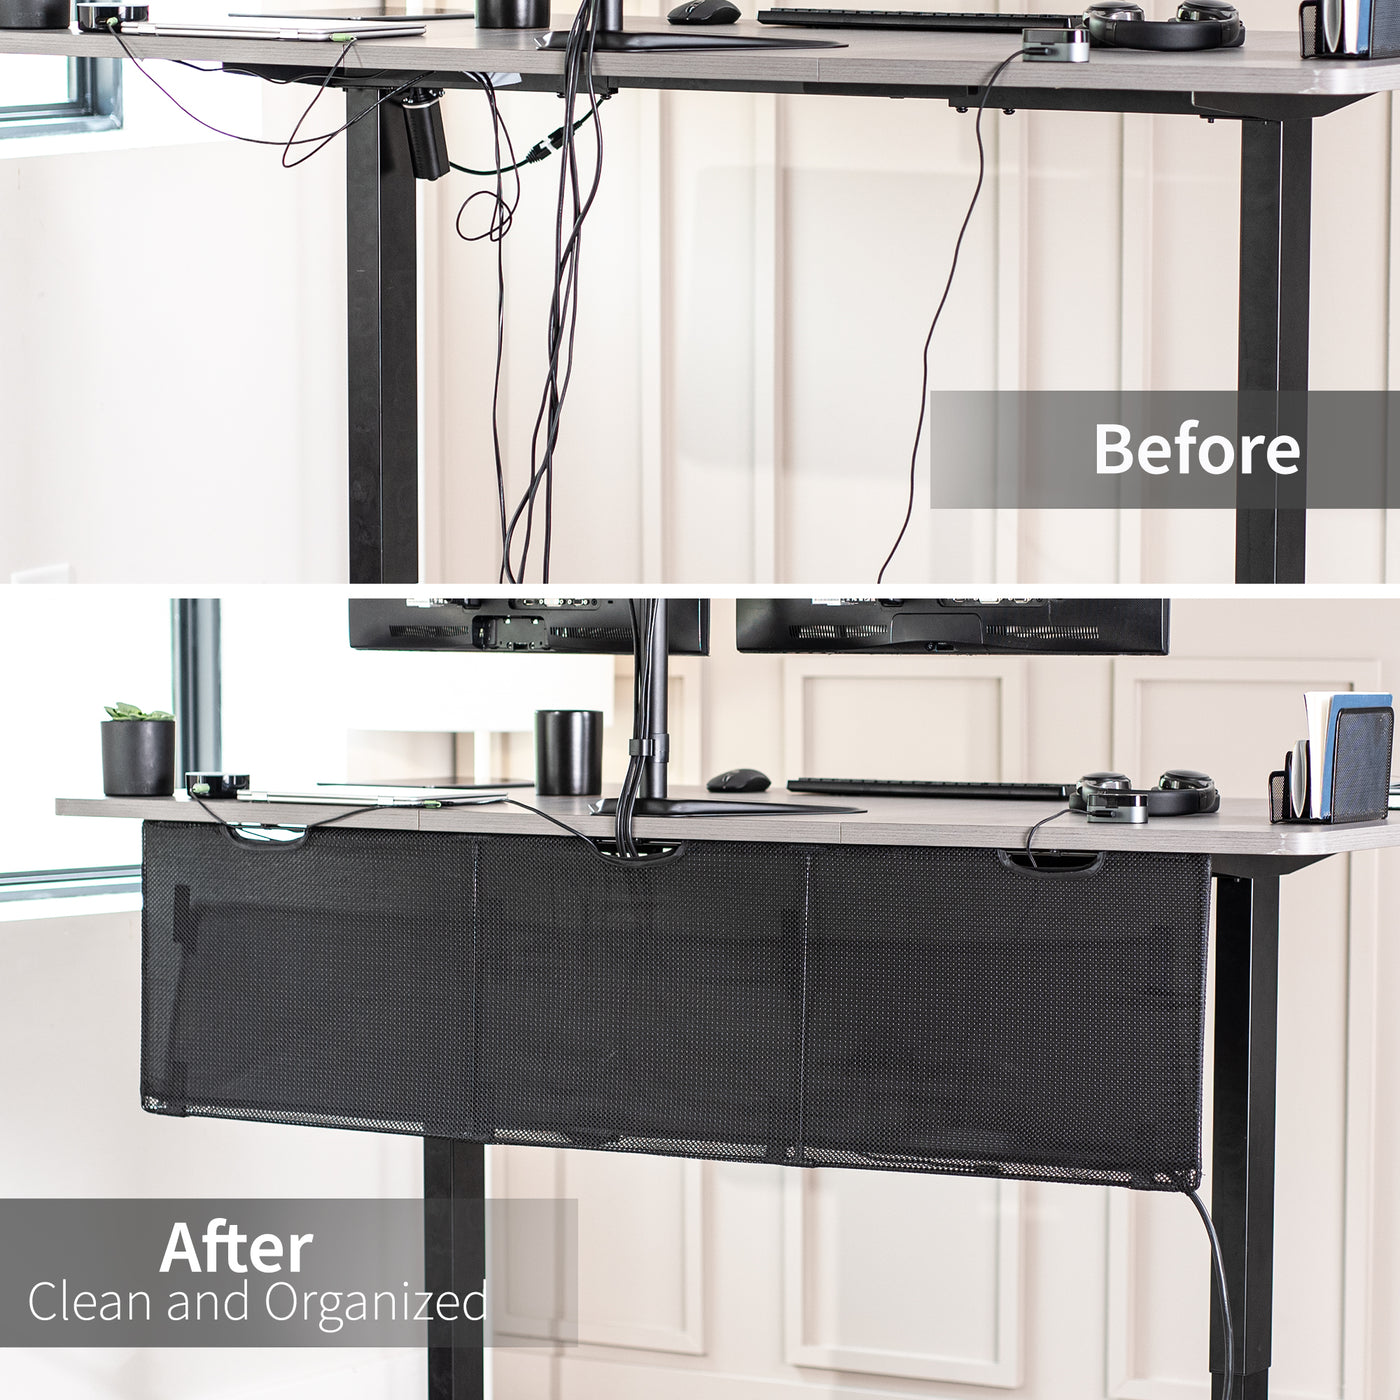 Black Cable Management Desk Organizer helps reduce workspace clutter by routing and concealing cables and power strips.